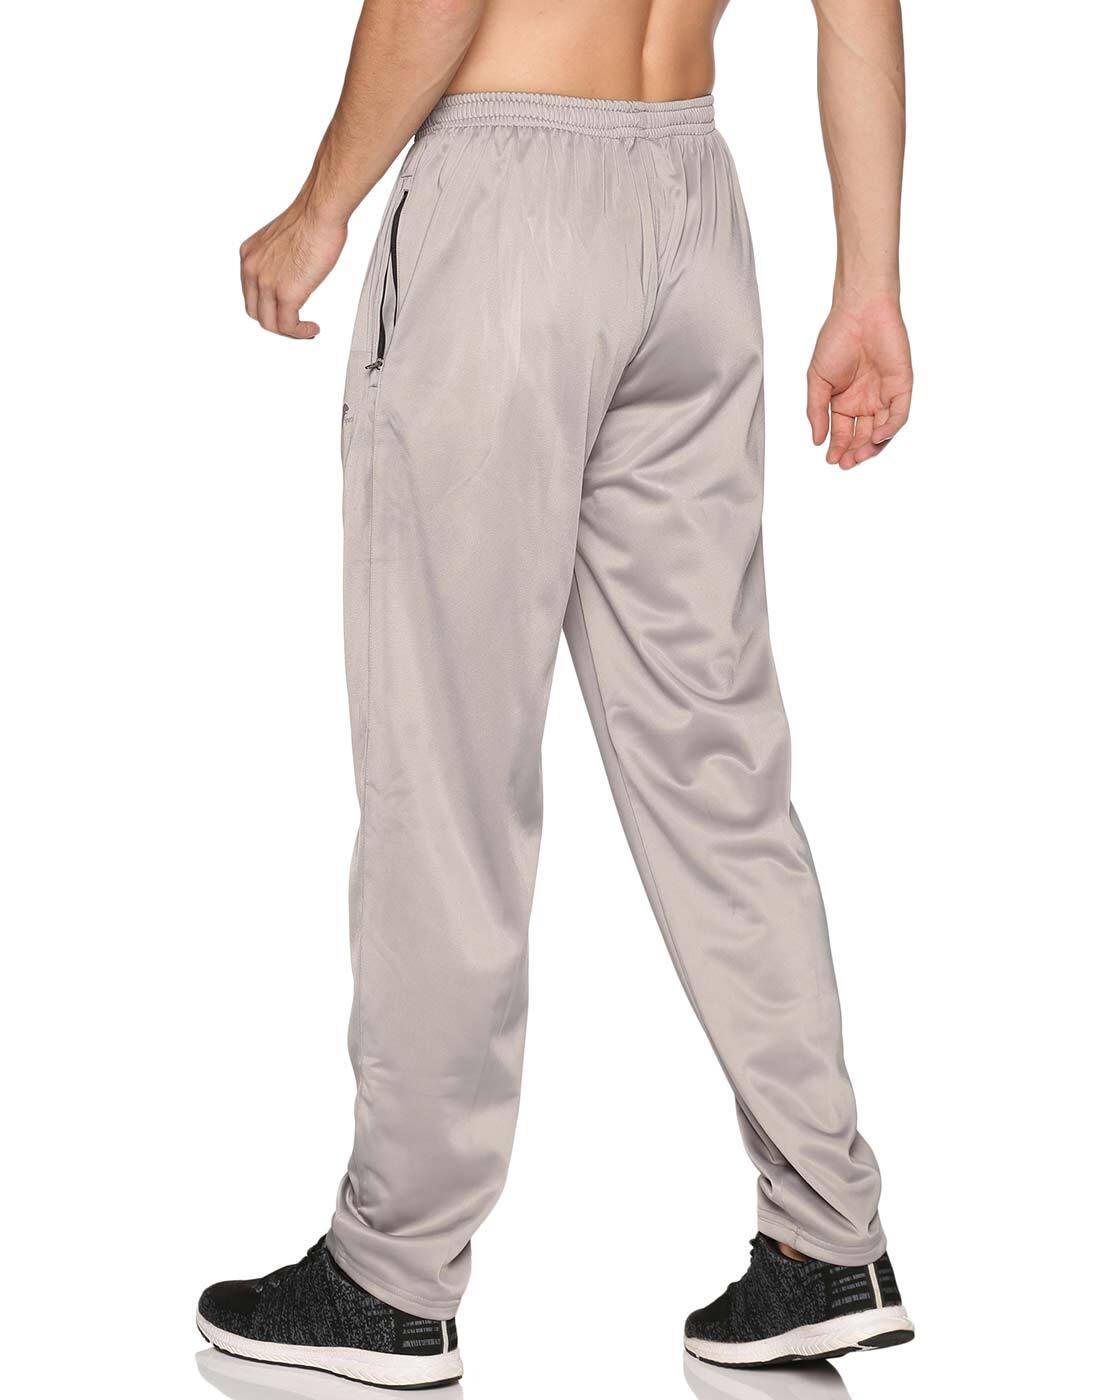 Mens Sports Track Pant Age Group Adults at Best Price in Tirupur  Snv Tex